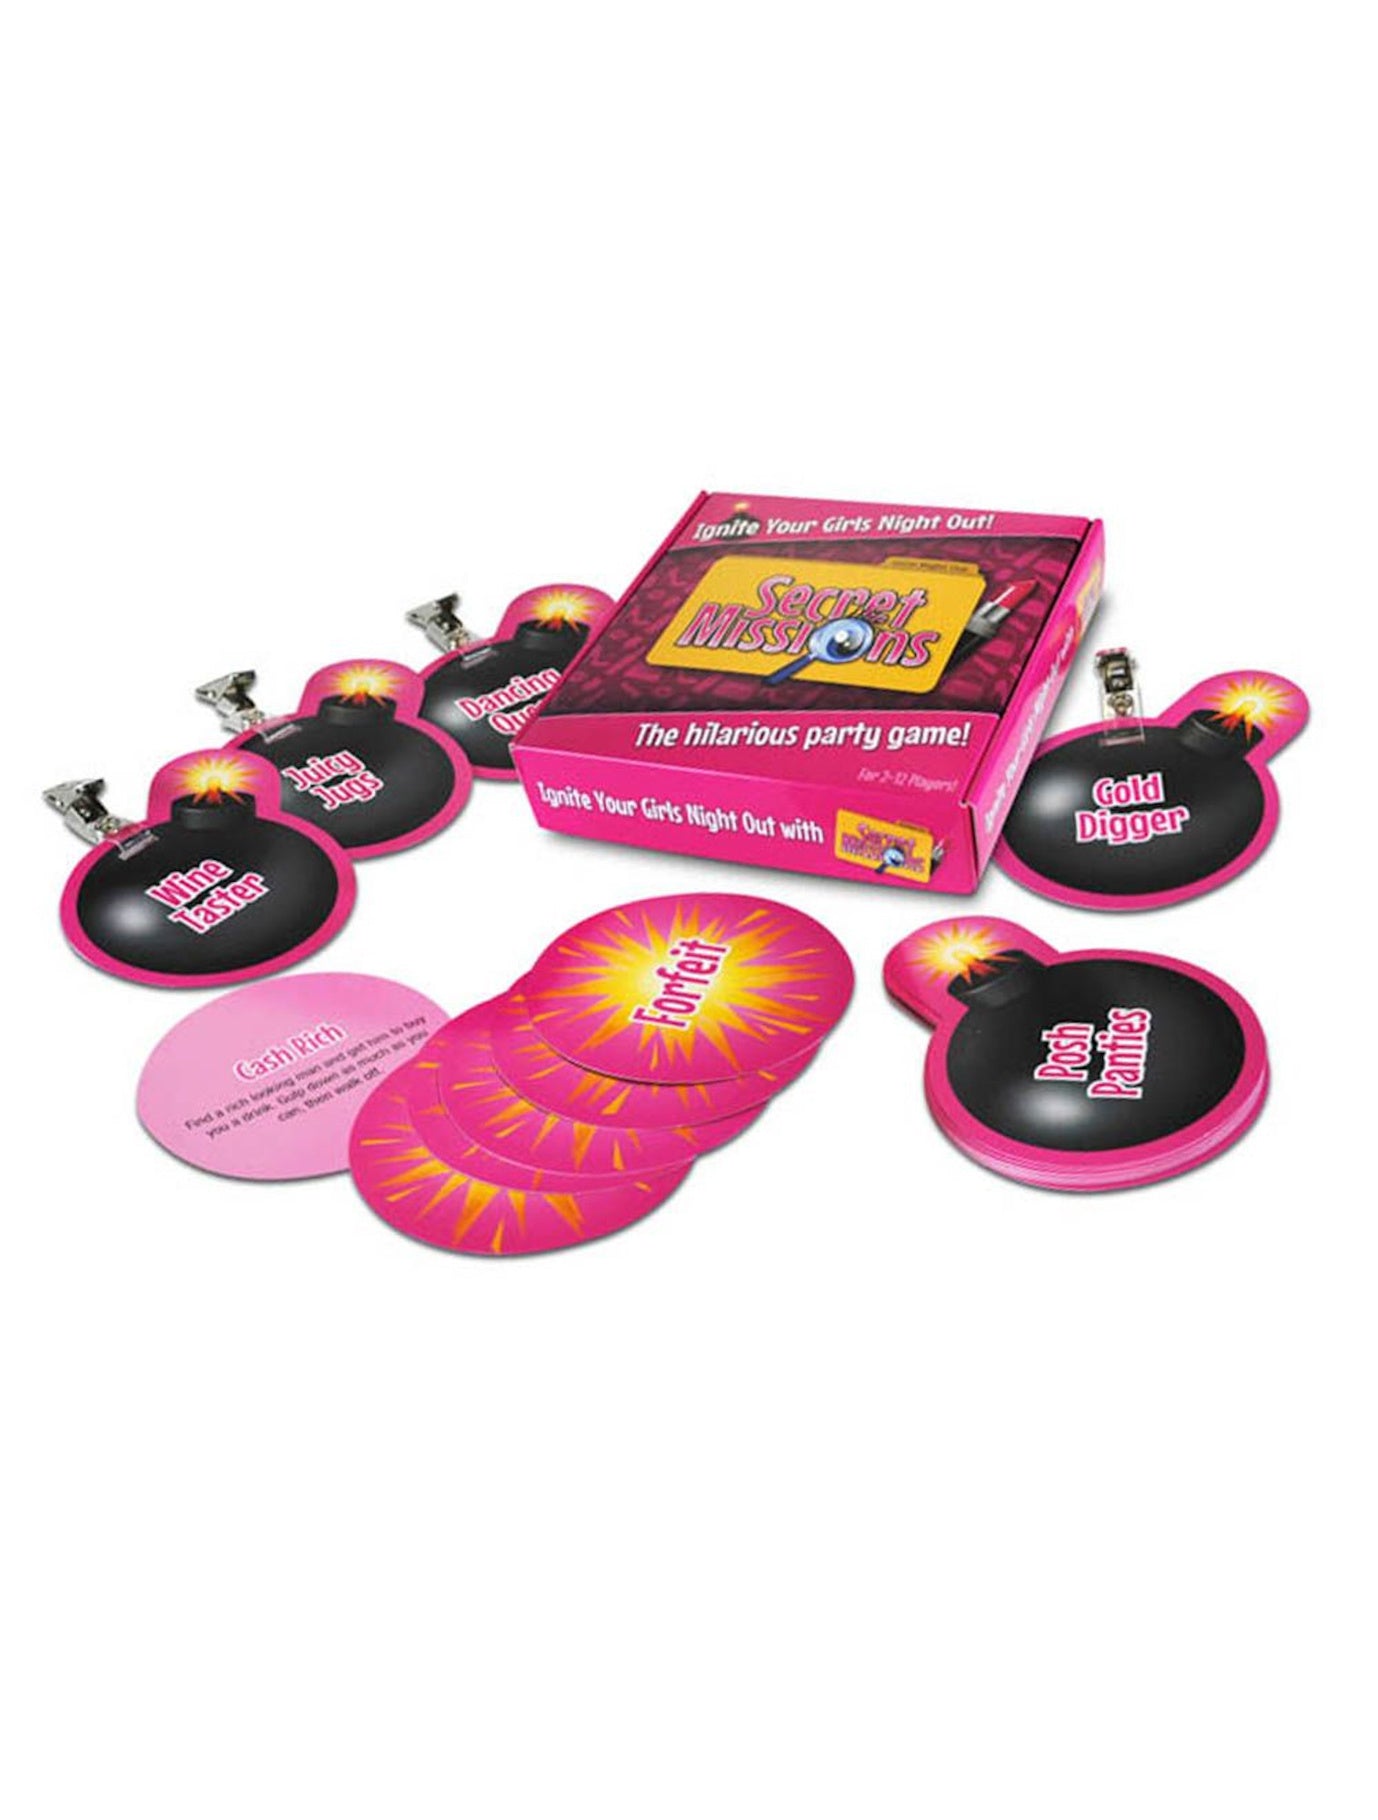 Creative Conceptions Secret Mission Girls Night Out Game - XOXTOYS